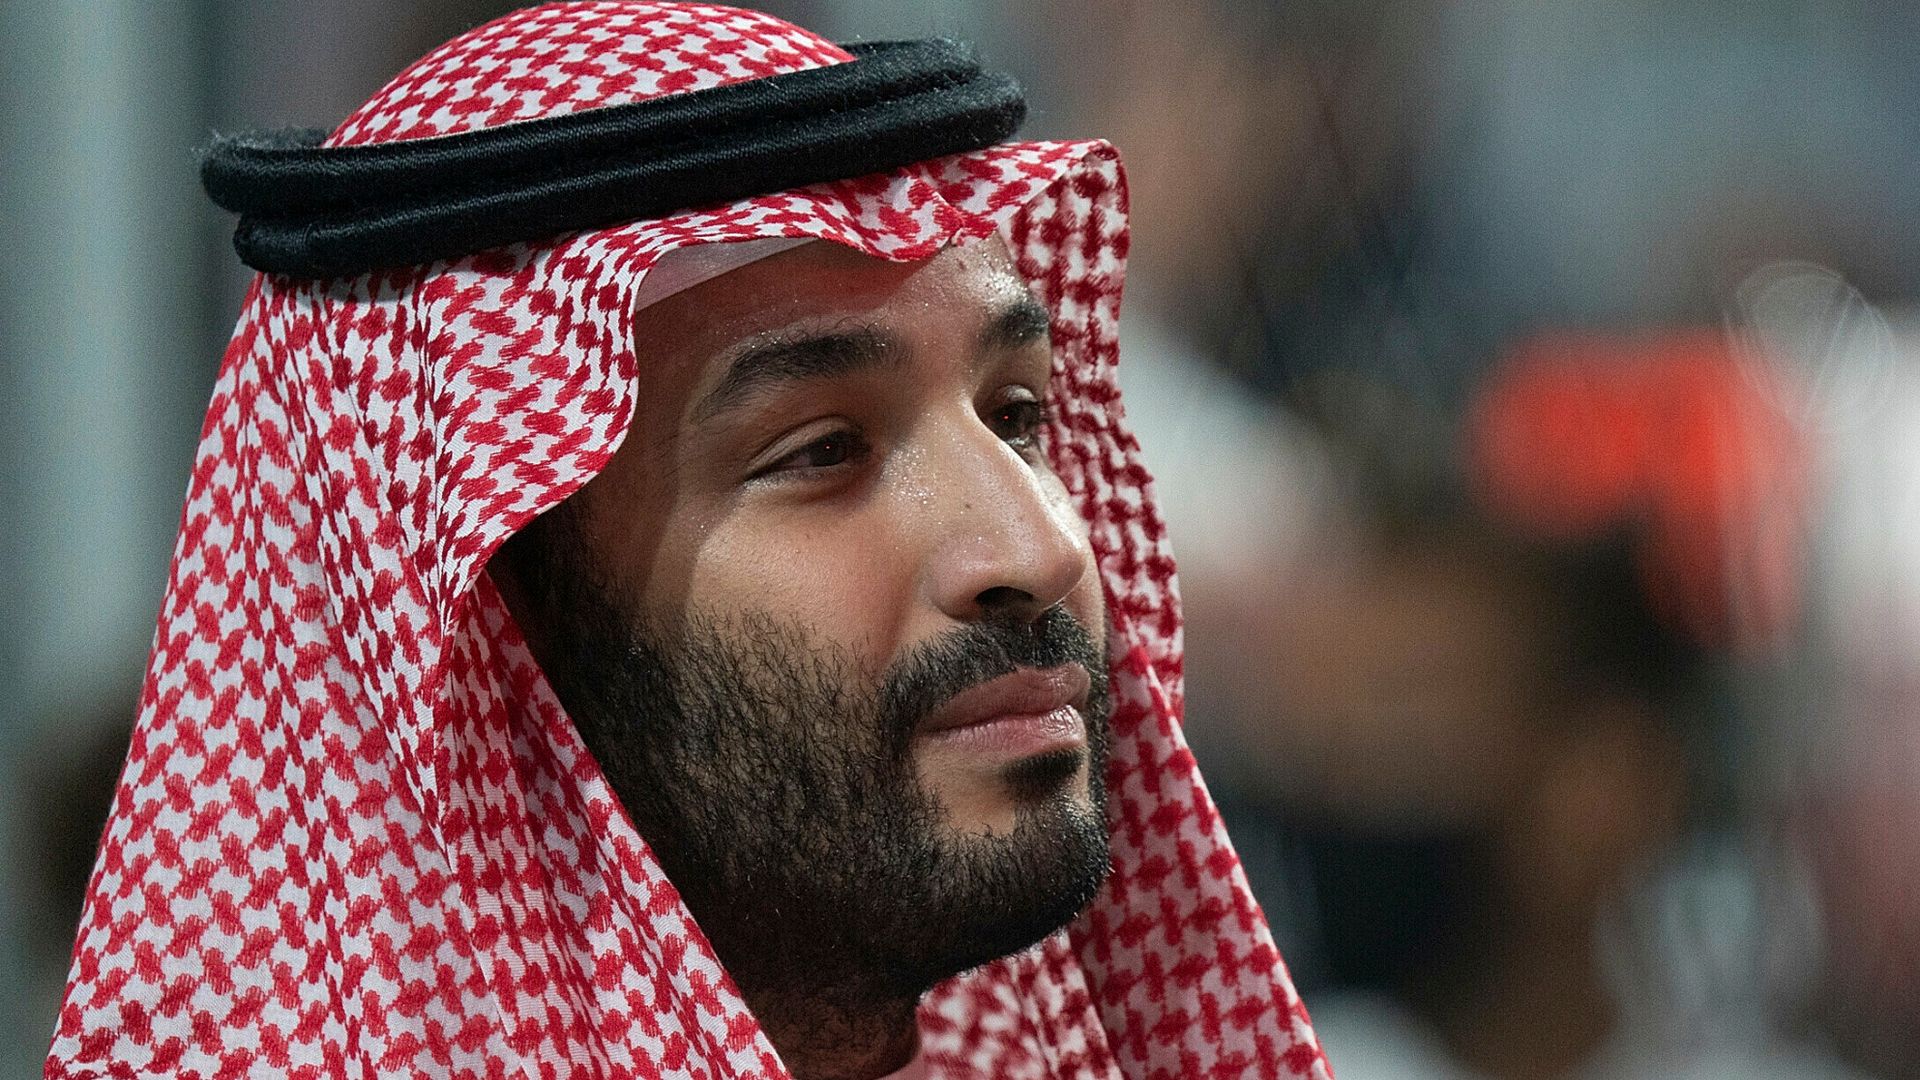 Saudi Crown Prince: I don't care about sportswashing accusations